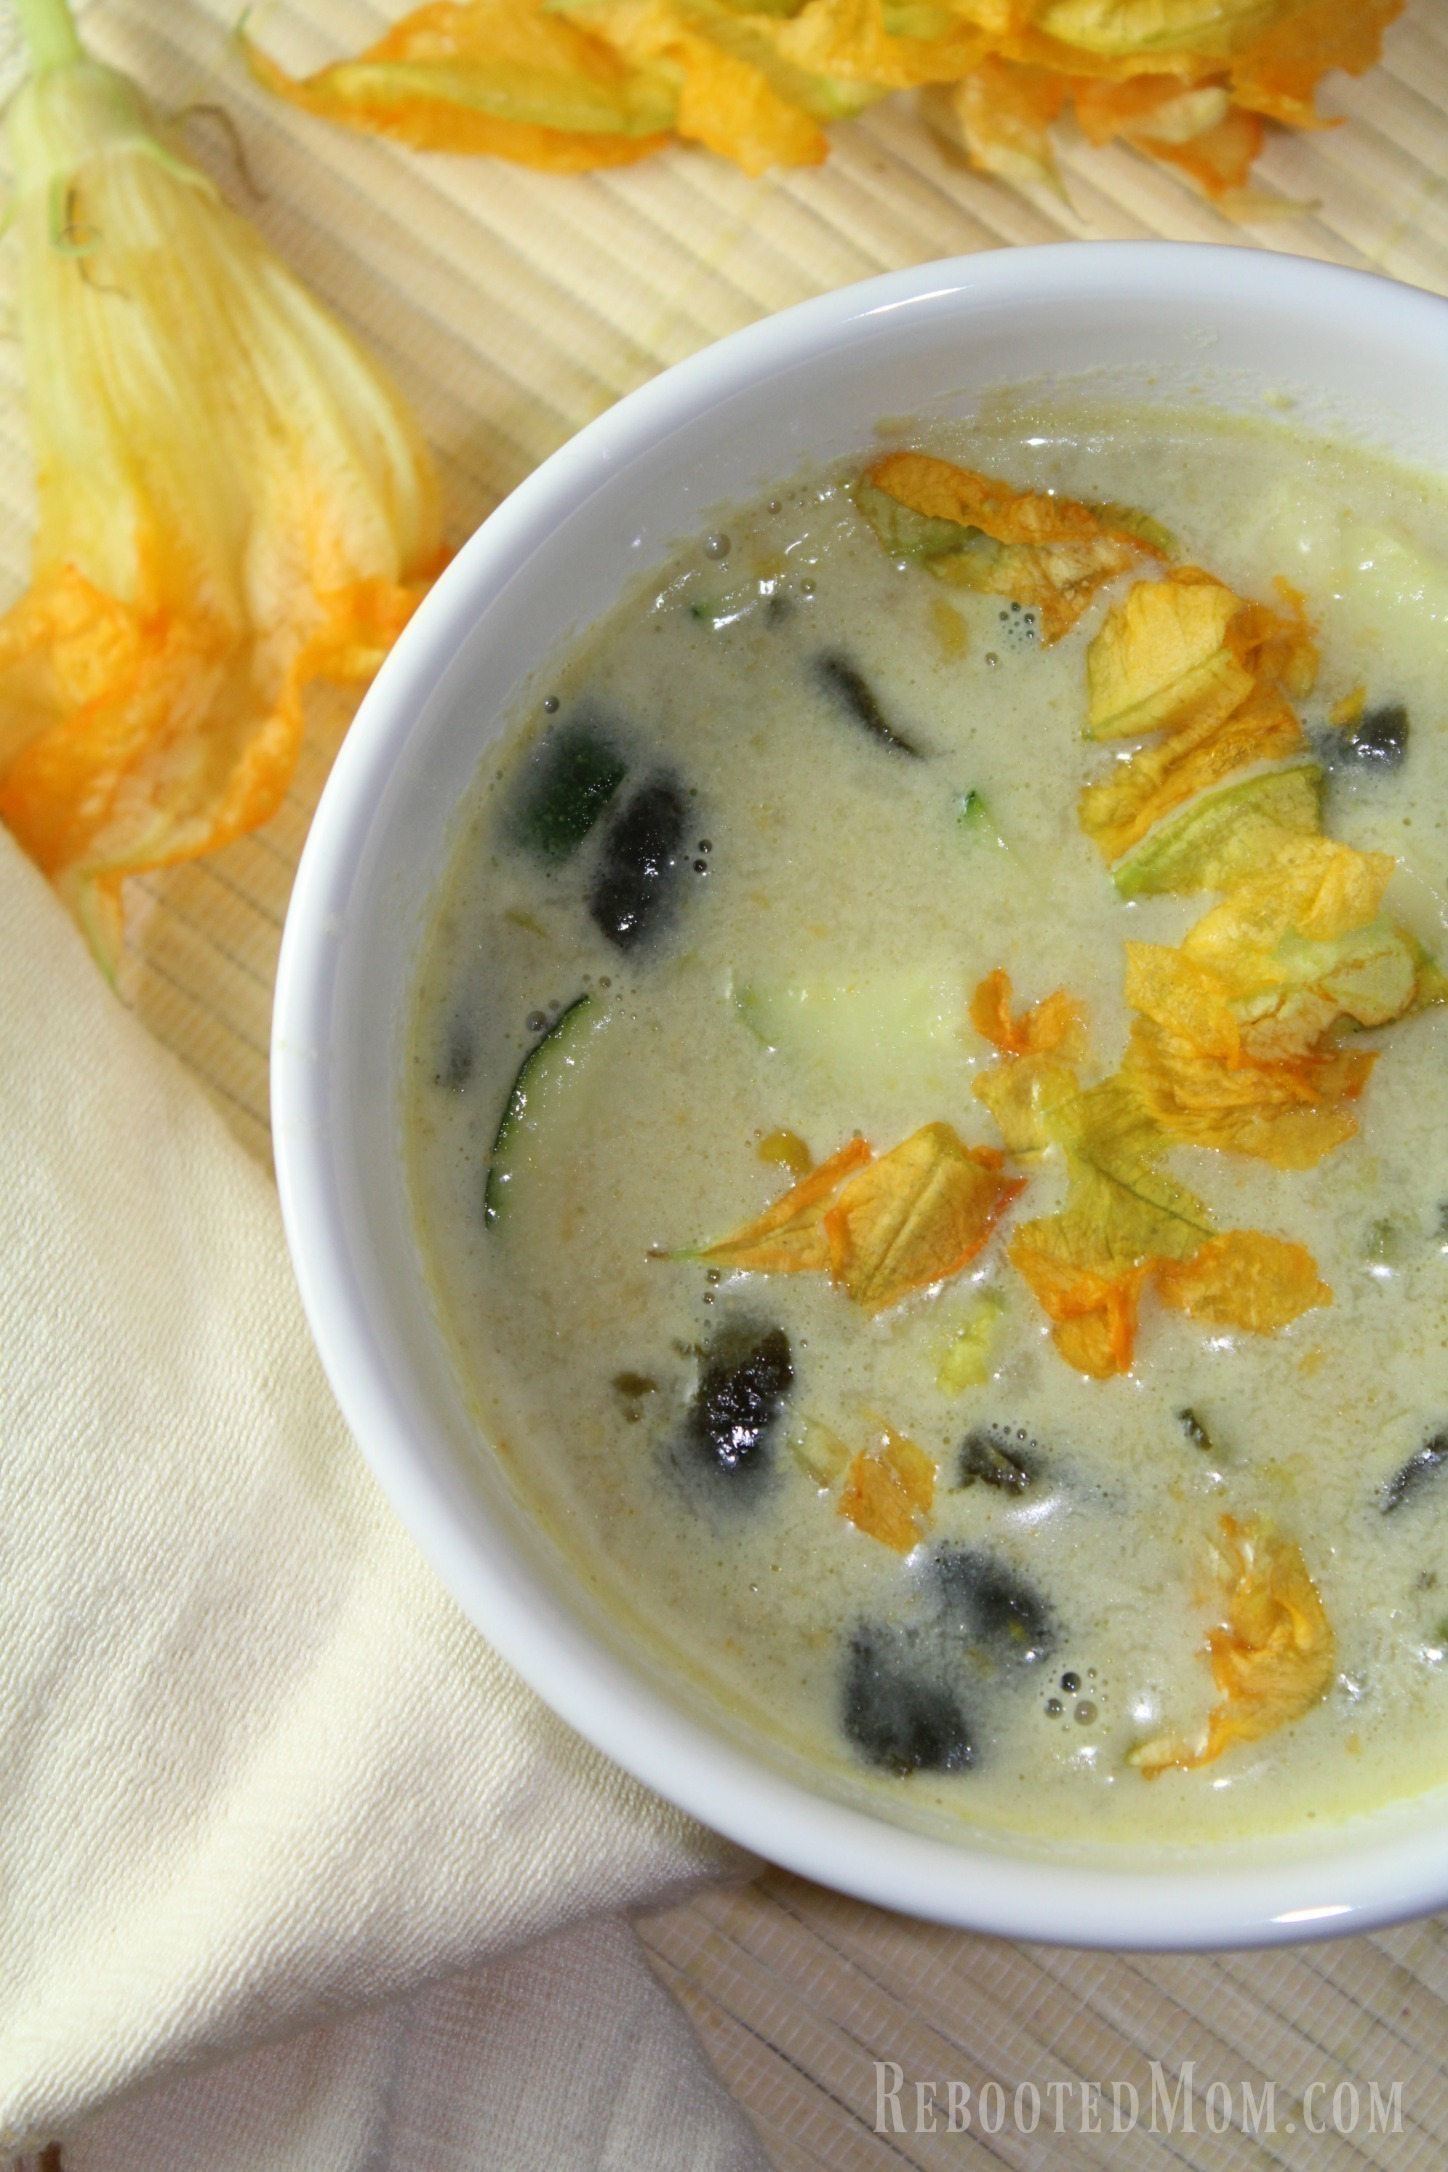 This rich and creamy Squash Blossom Soup uses Squash Blossoms and fresh summer produce to make a hearty and satisfying meal.